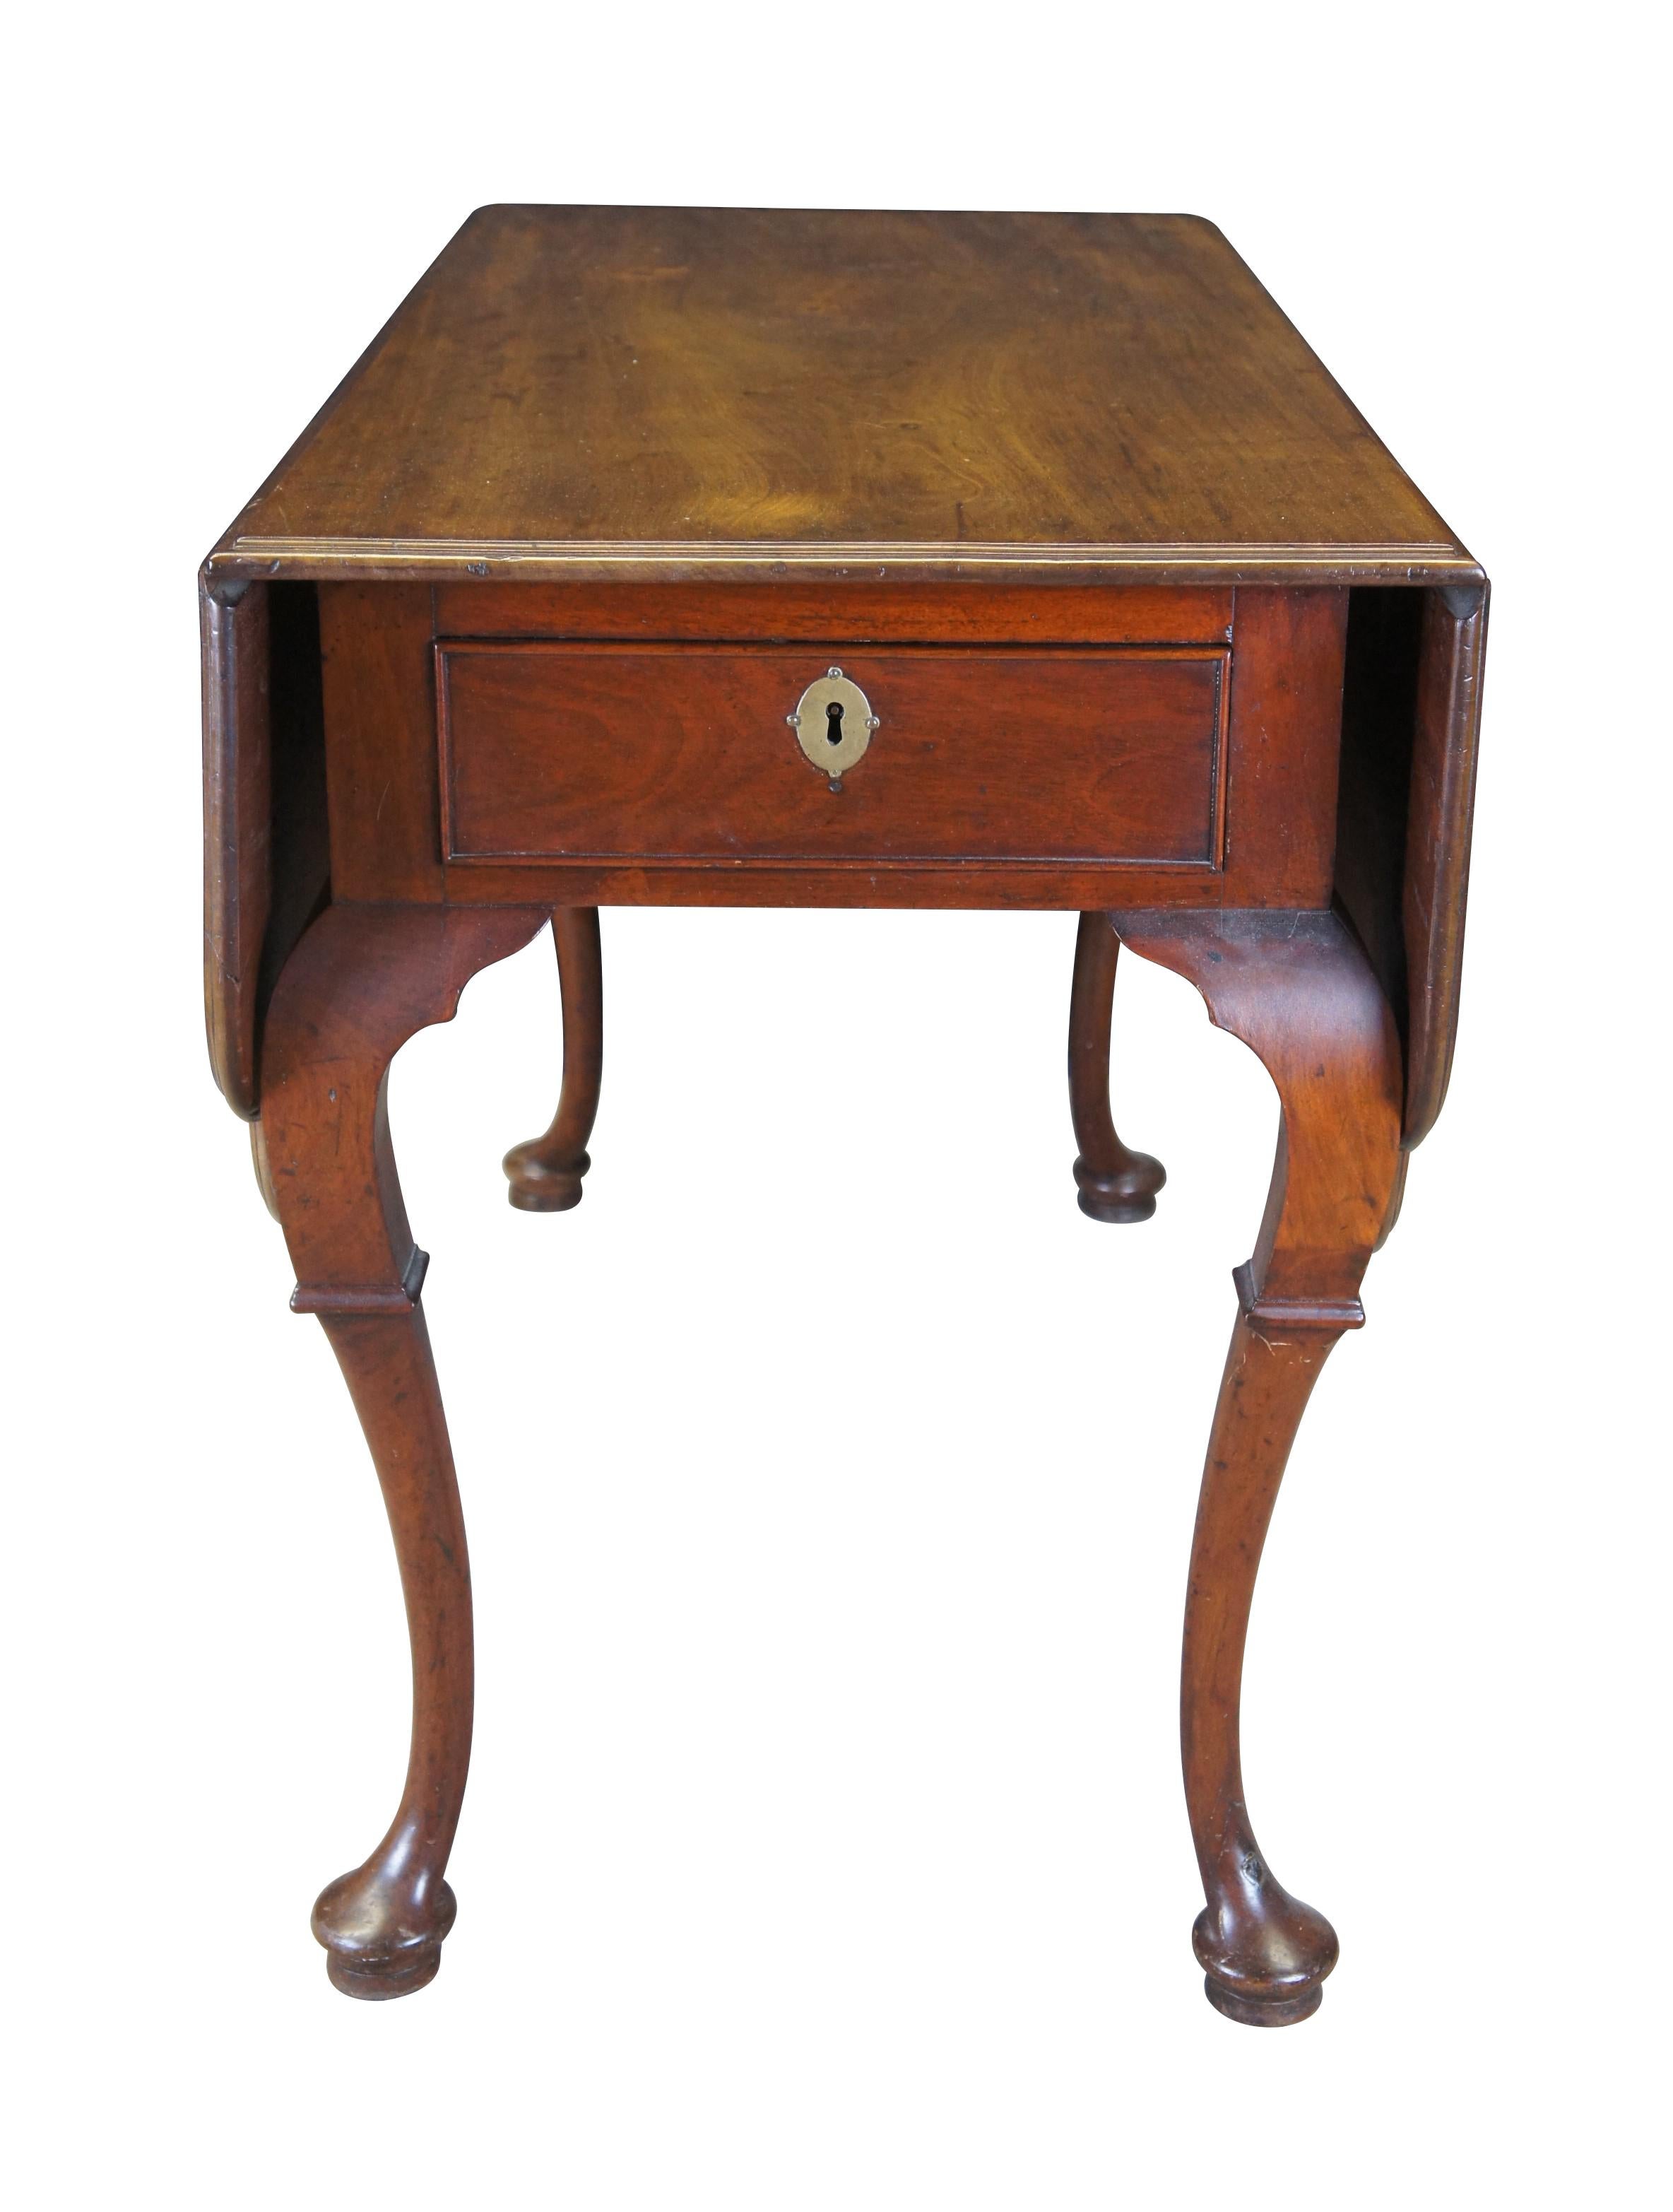 Antique 18th century George II style mahogany drop leaf library / breakfast console table.  Made of mahogany featuring large notched leaves with double sided drawers and cabriole pad foot legs.

Dimensions:
42